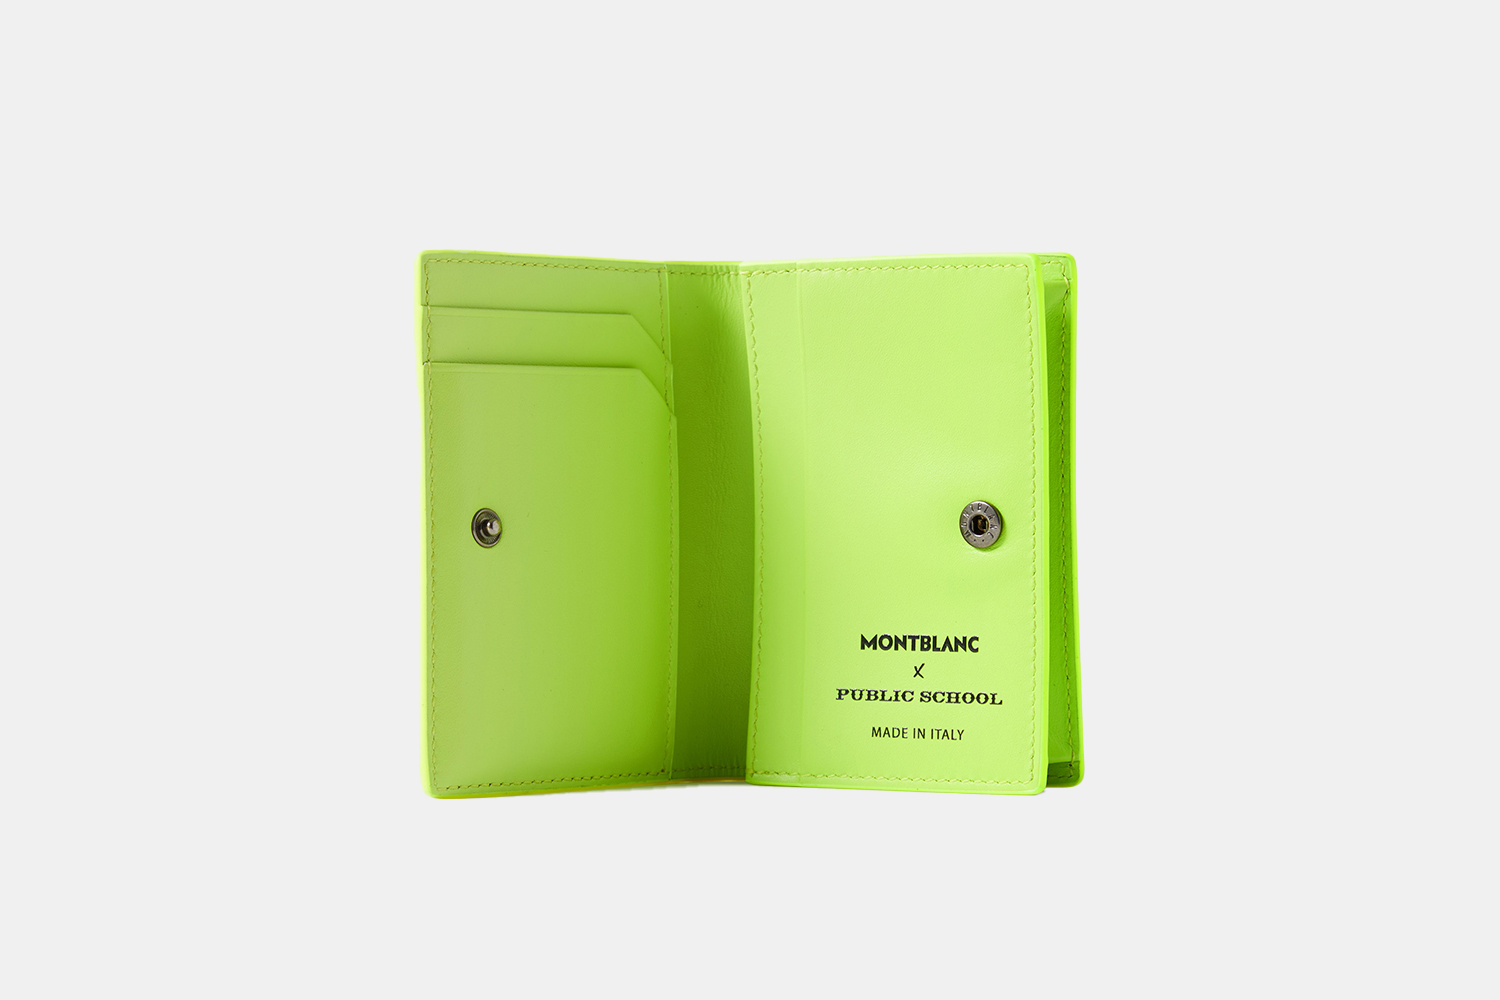 A neon yellow cardholder